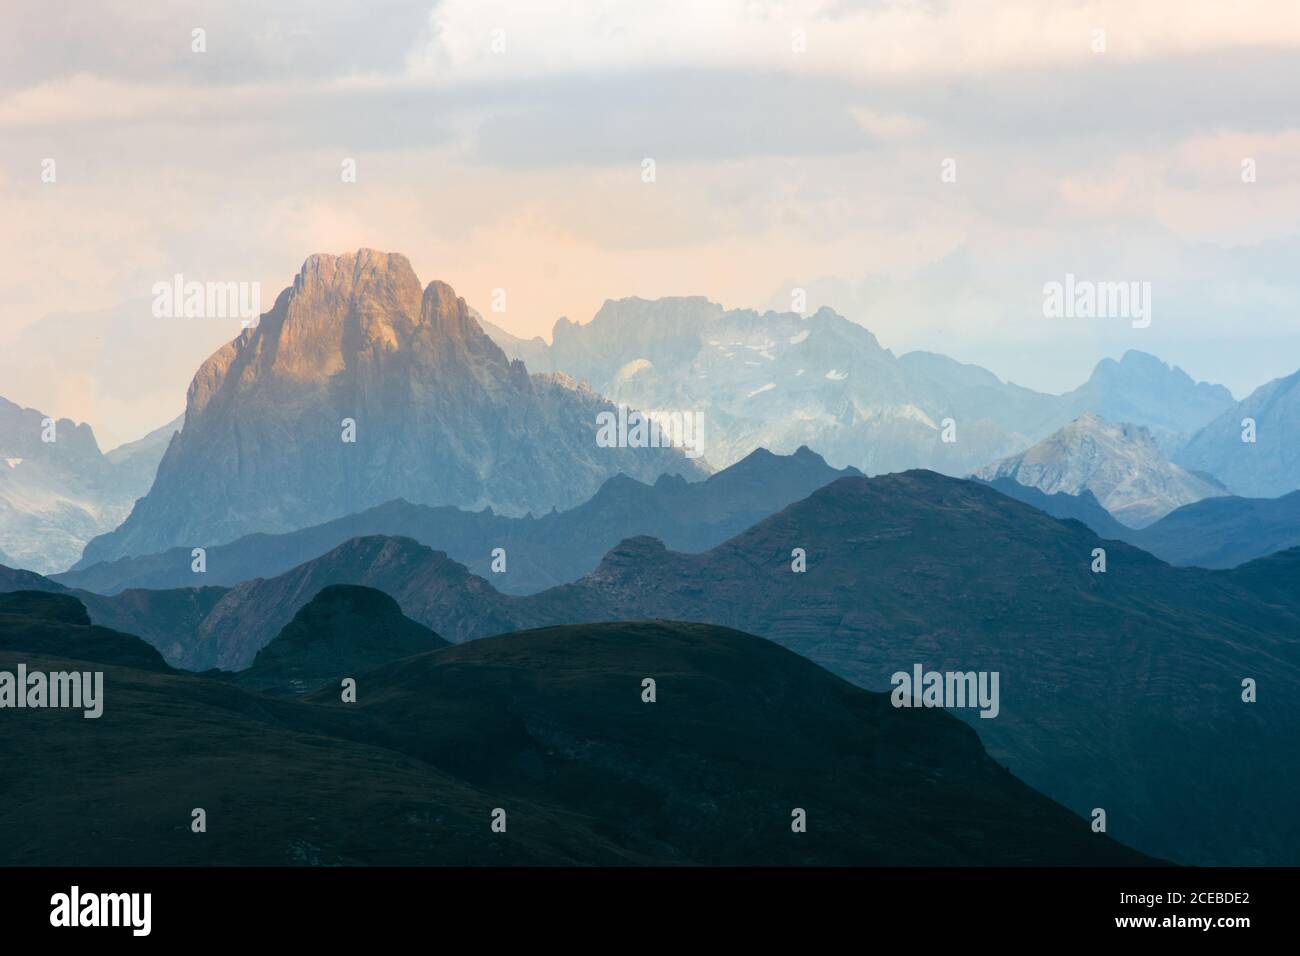 Magnificent view of spectacular mountains on cloudy day in wonderful nature Stock Photo